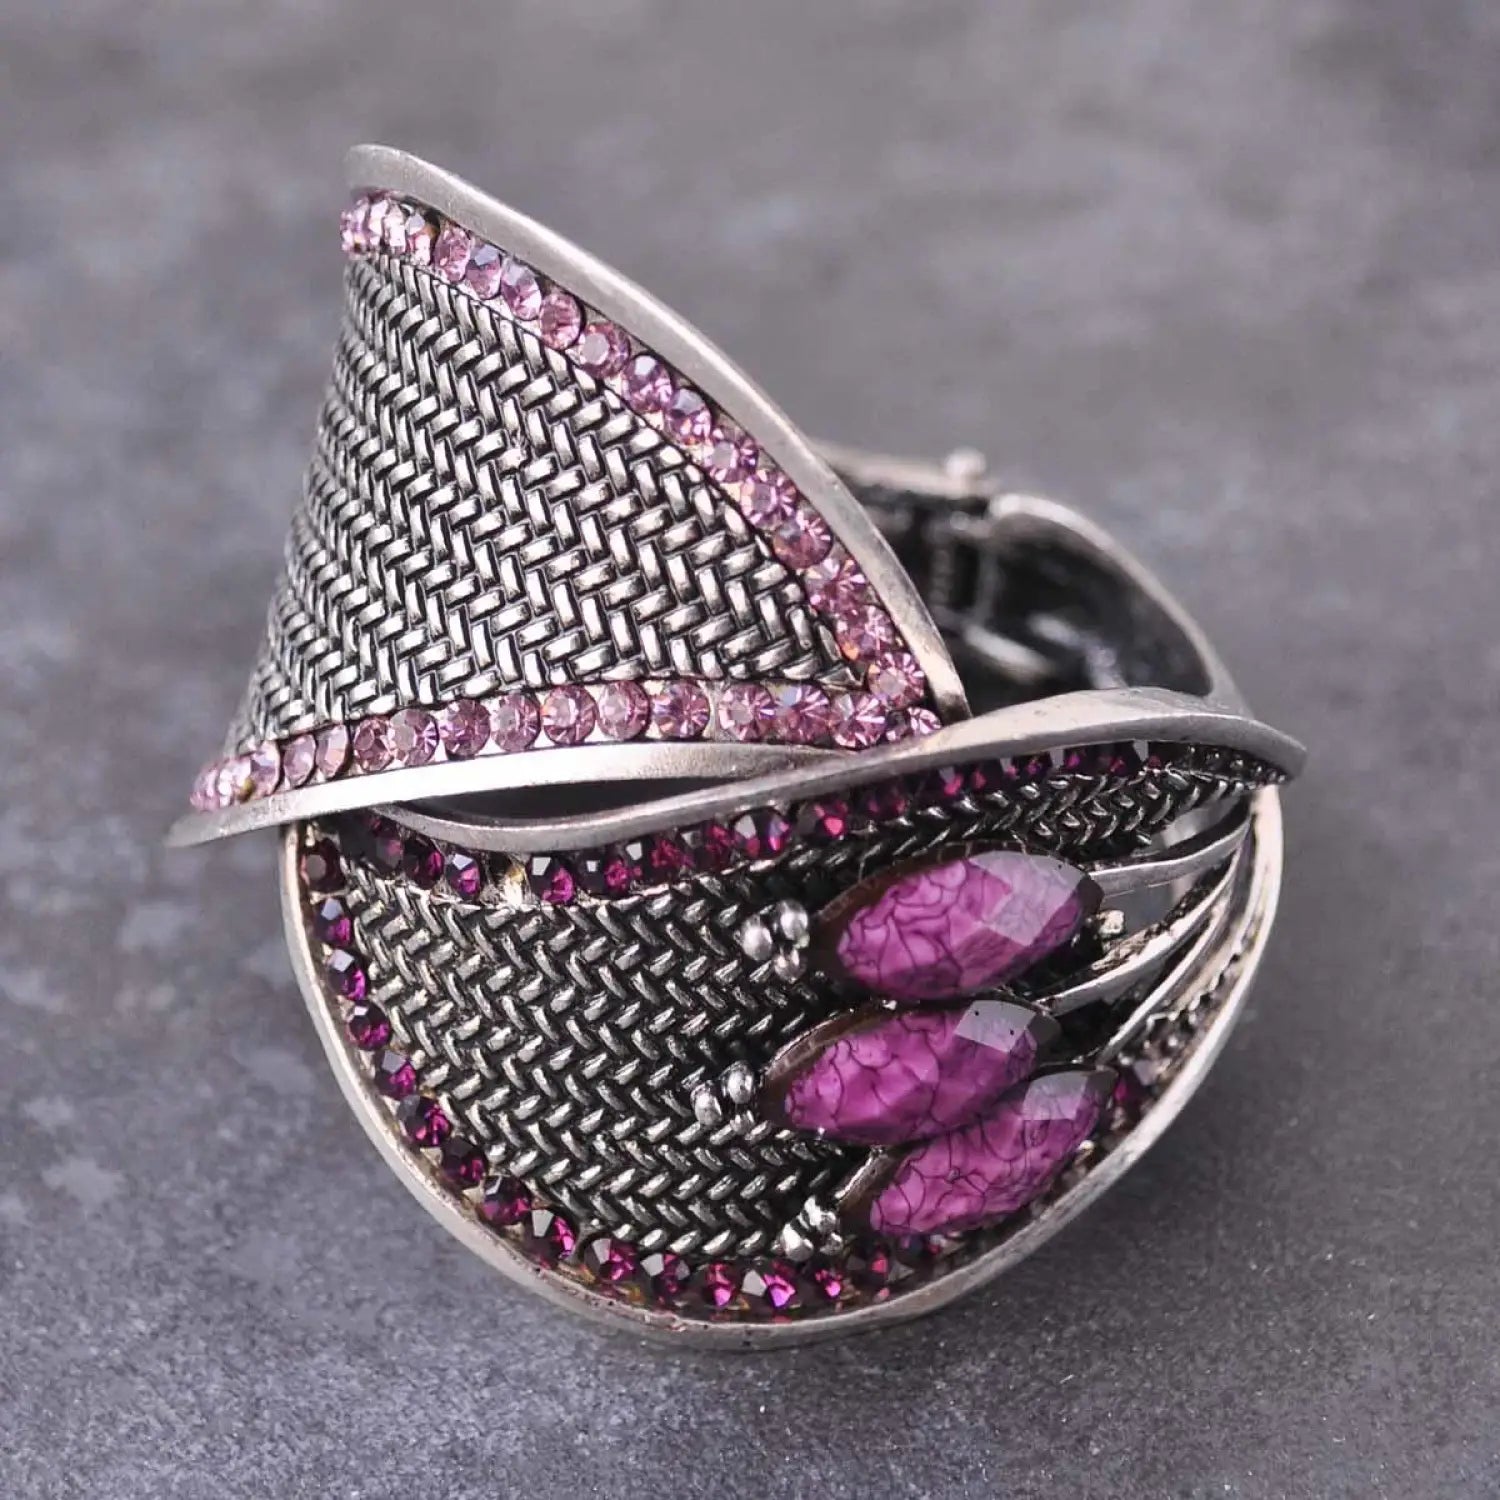 Silver bangle bracelet with pink stones and silver band - Wedding accessory.